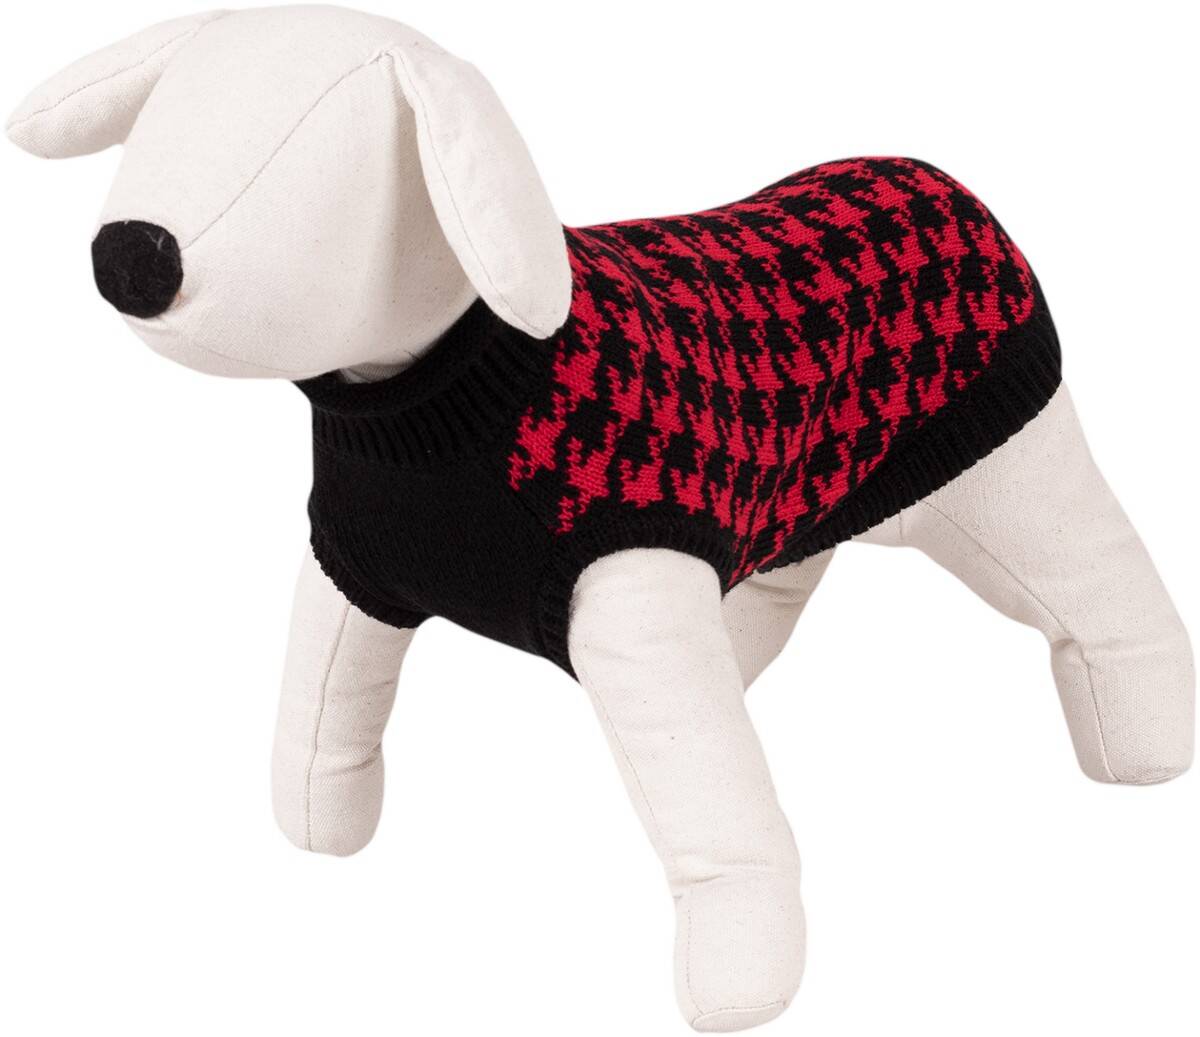 Dog Sweater / Houndstooth Pattern - Happet 480S - Black & Red S - 25cm